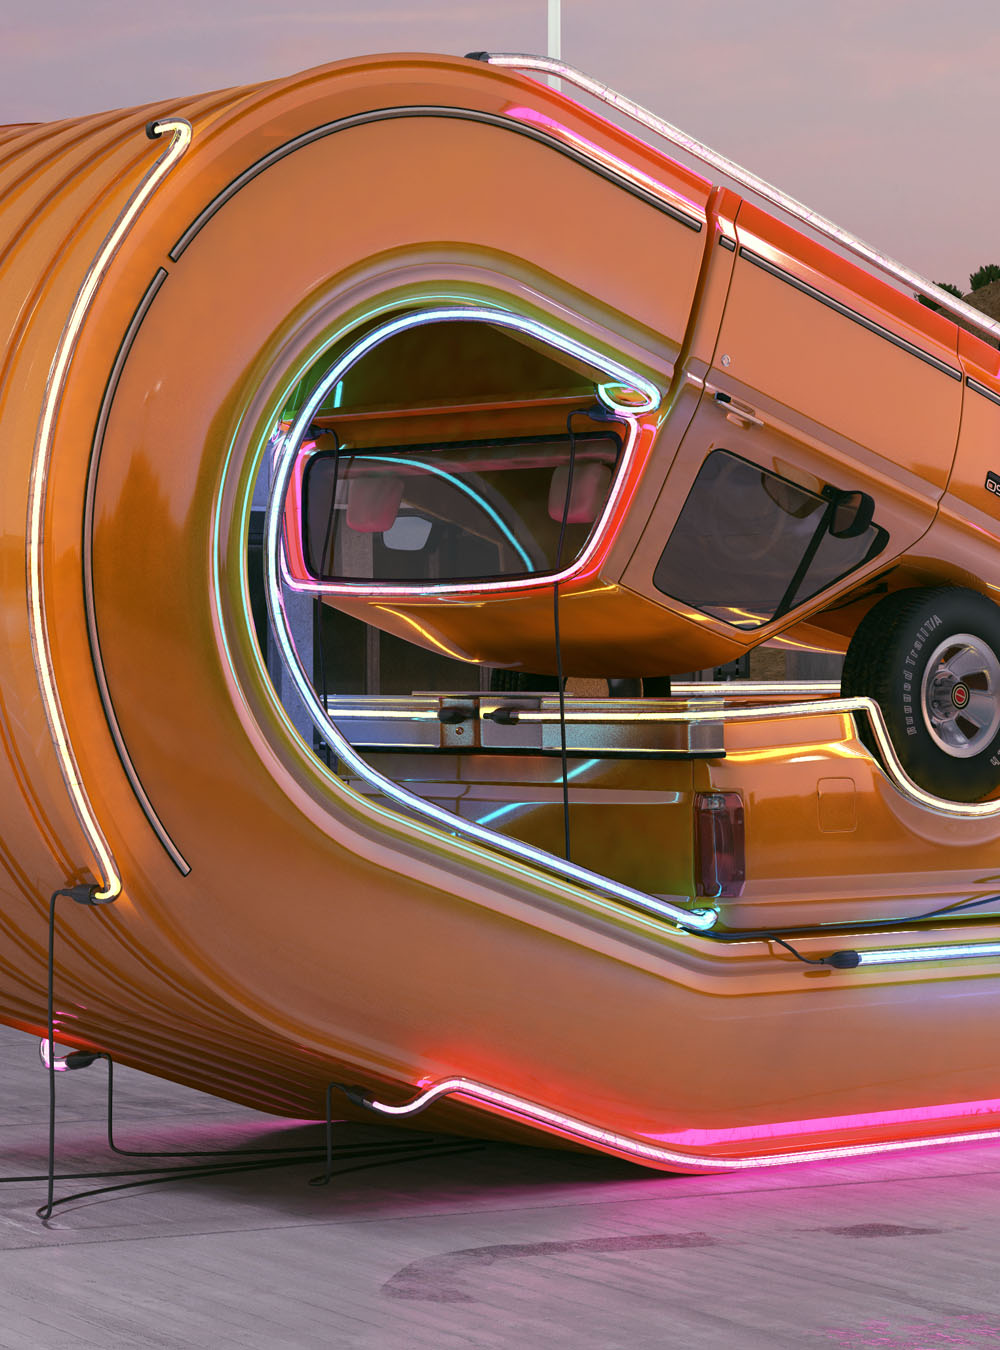 Cool Renders Of Trucks Bending Beyond The Laws Of Physics